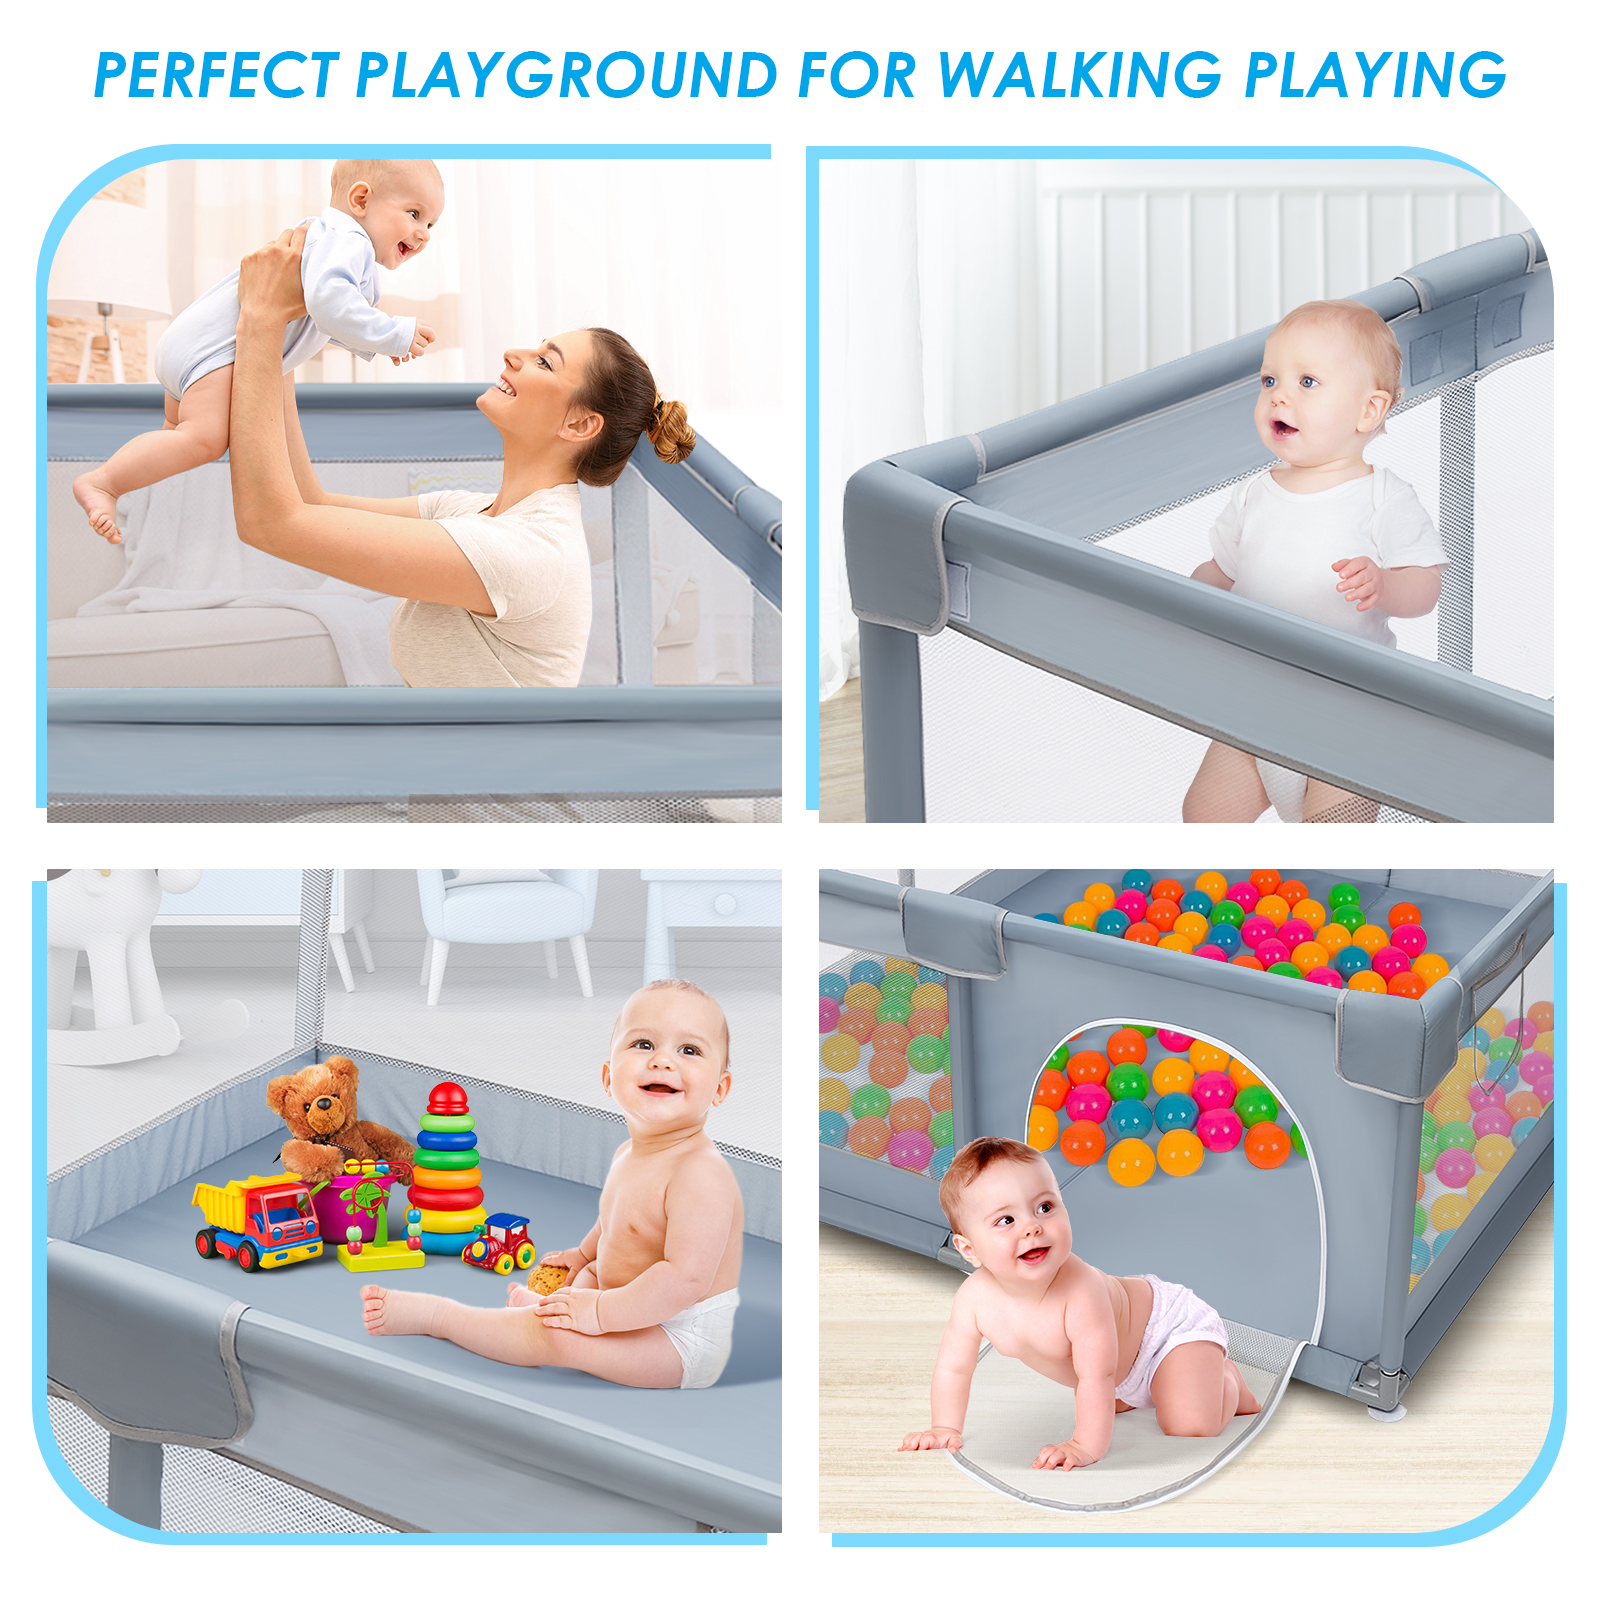 20X20M-Baby-Playpen-Extra-Large-Play-Yard-Indoor-Outdoor-Kids-Activity-Center-Gate-1949193-10